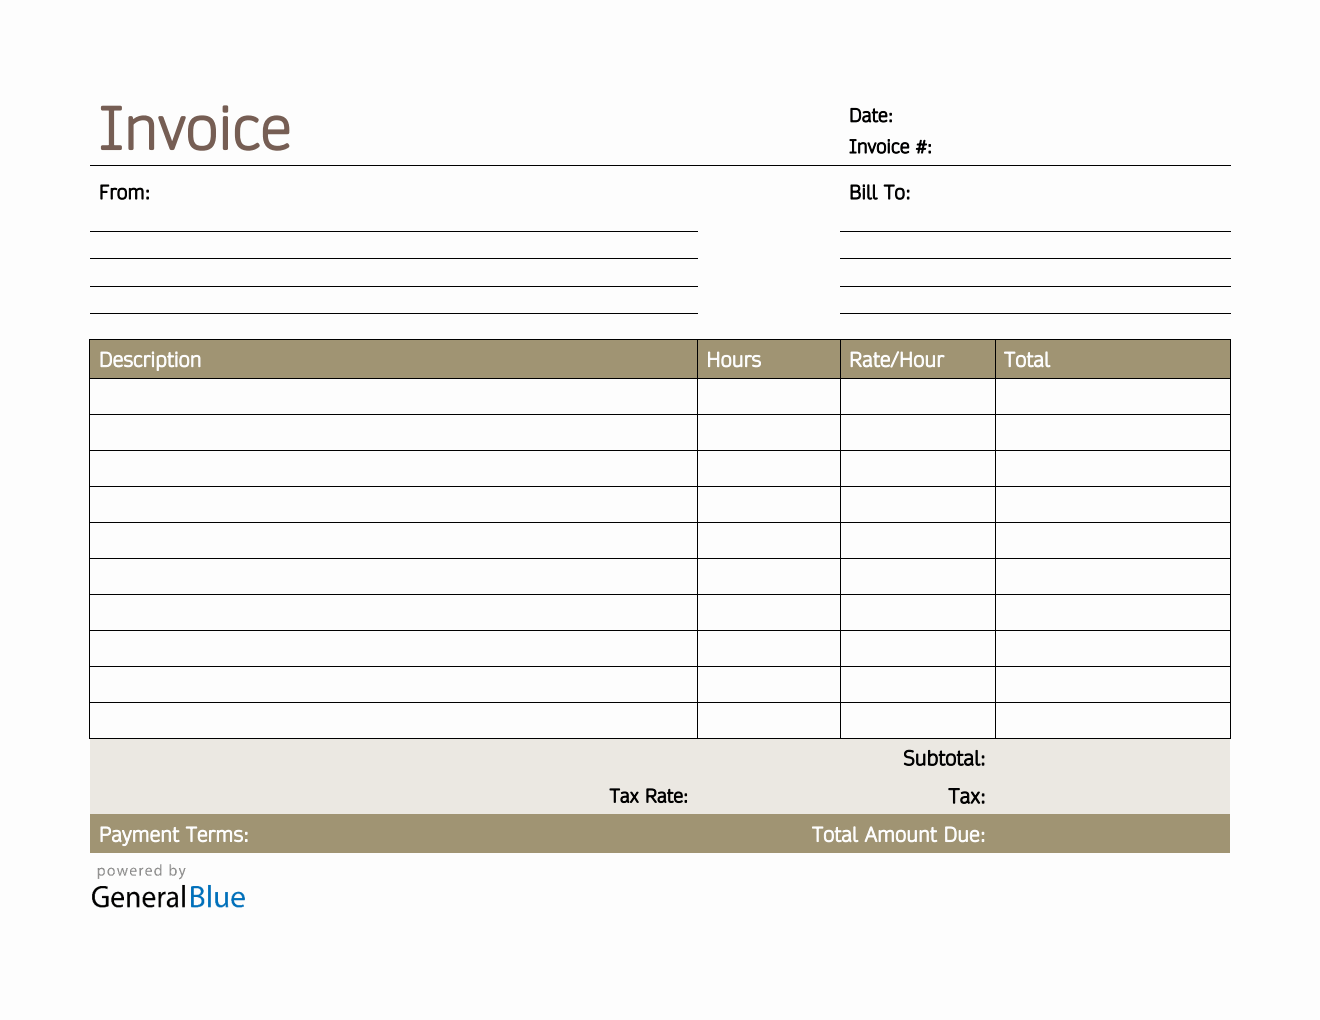 Freelance Hourly Invoice with Tax Calculation in PDF (Simple)